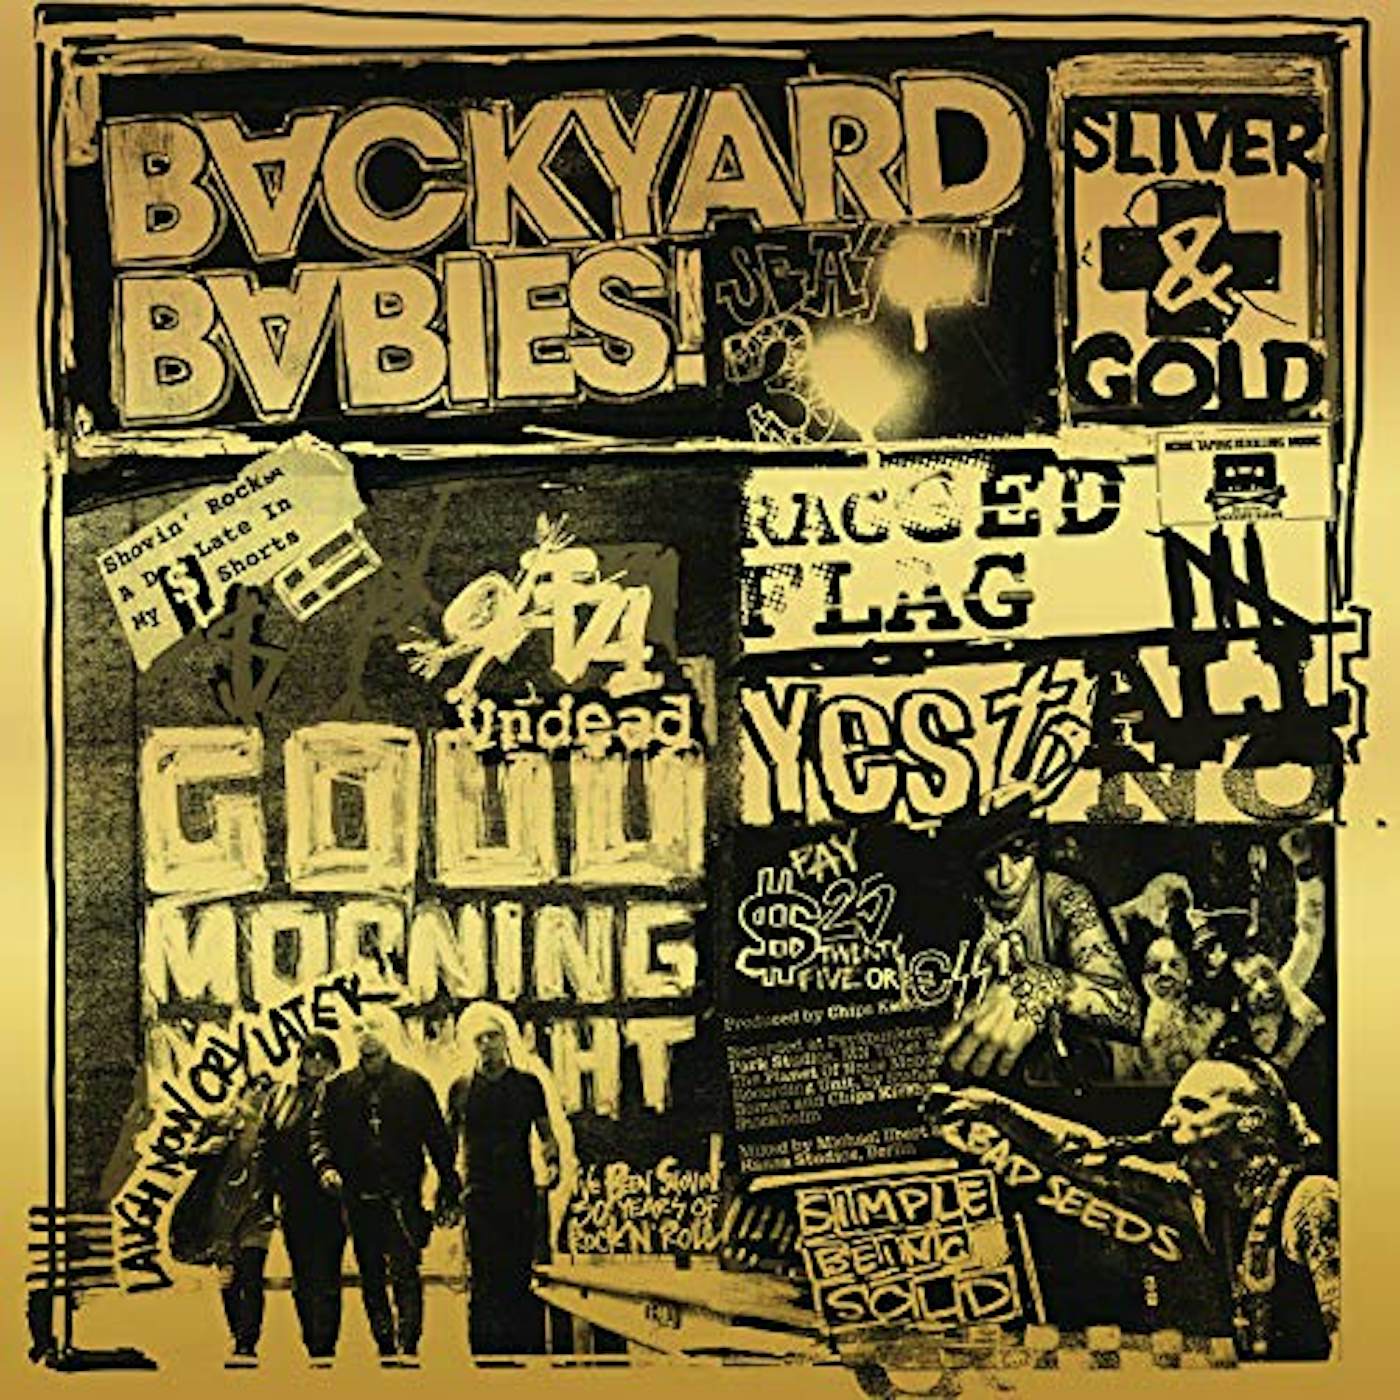 Backyard Babies SLIVER AND GOLD Vinyl Record